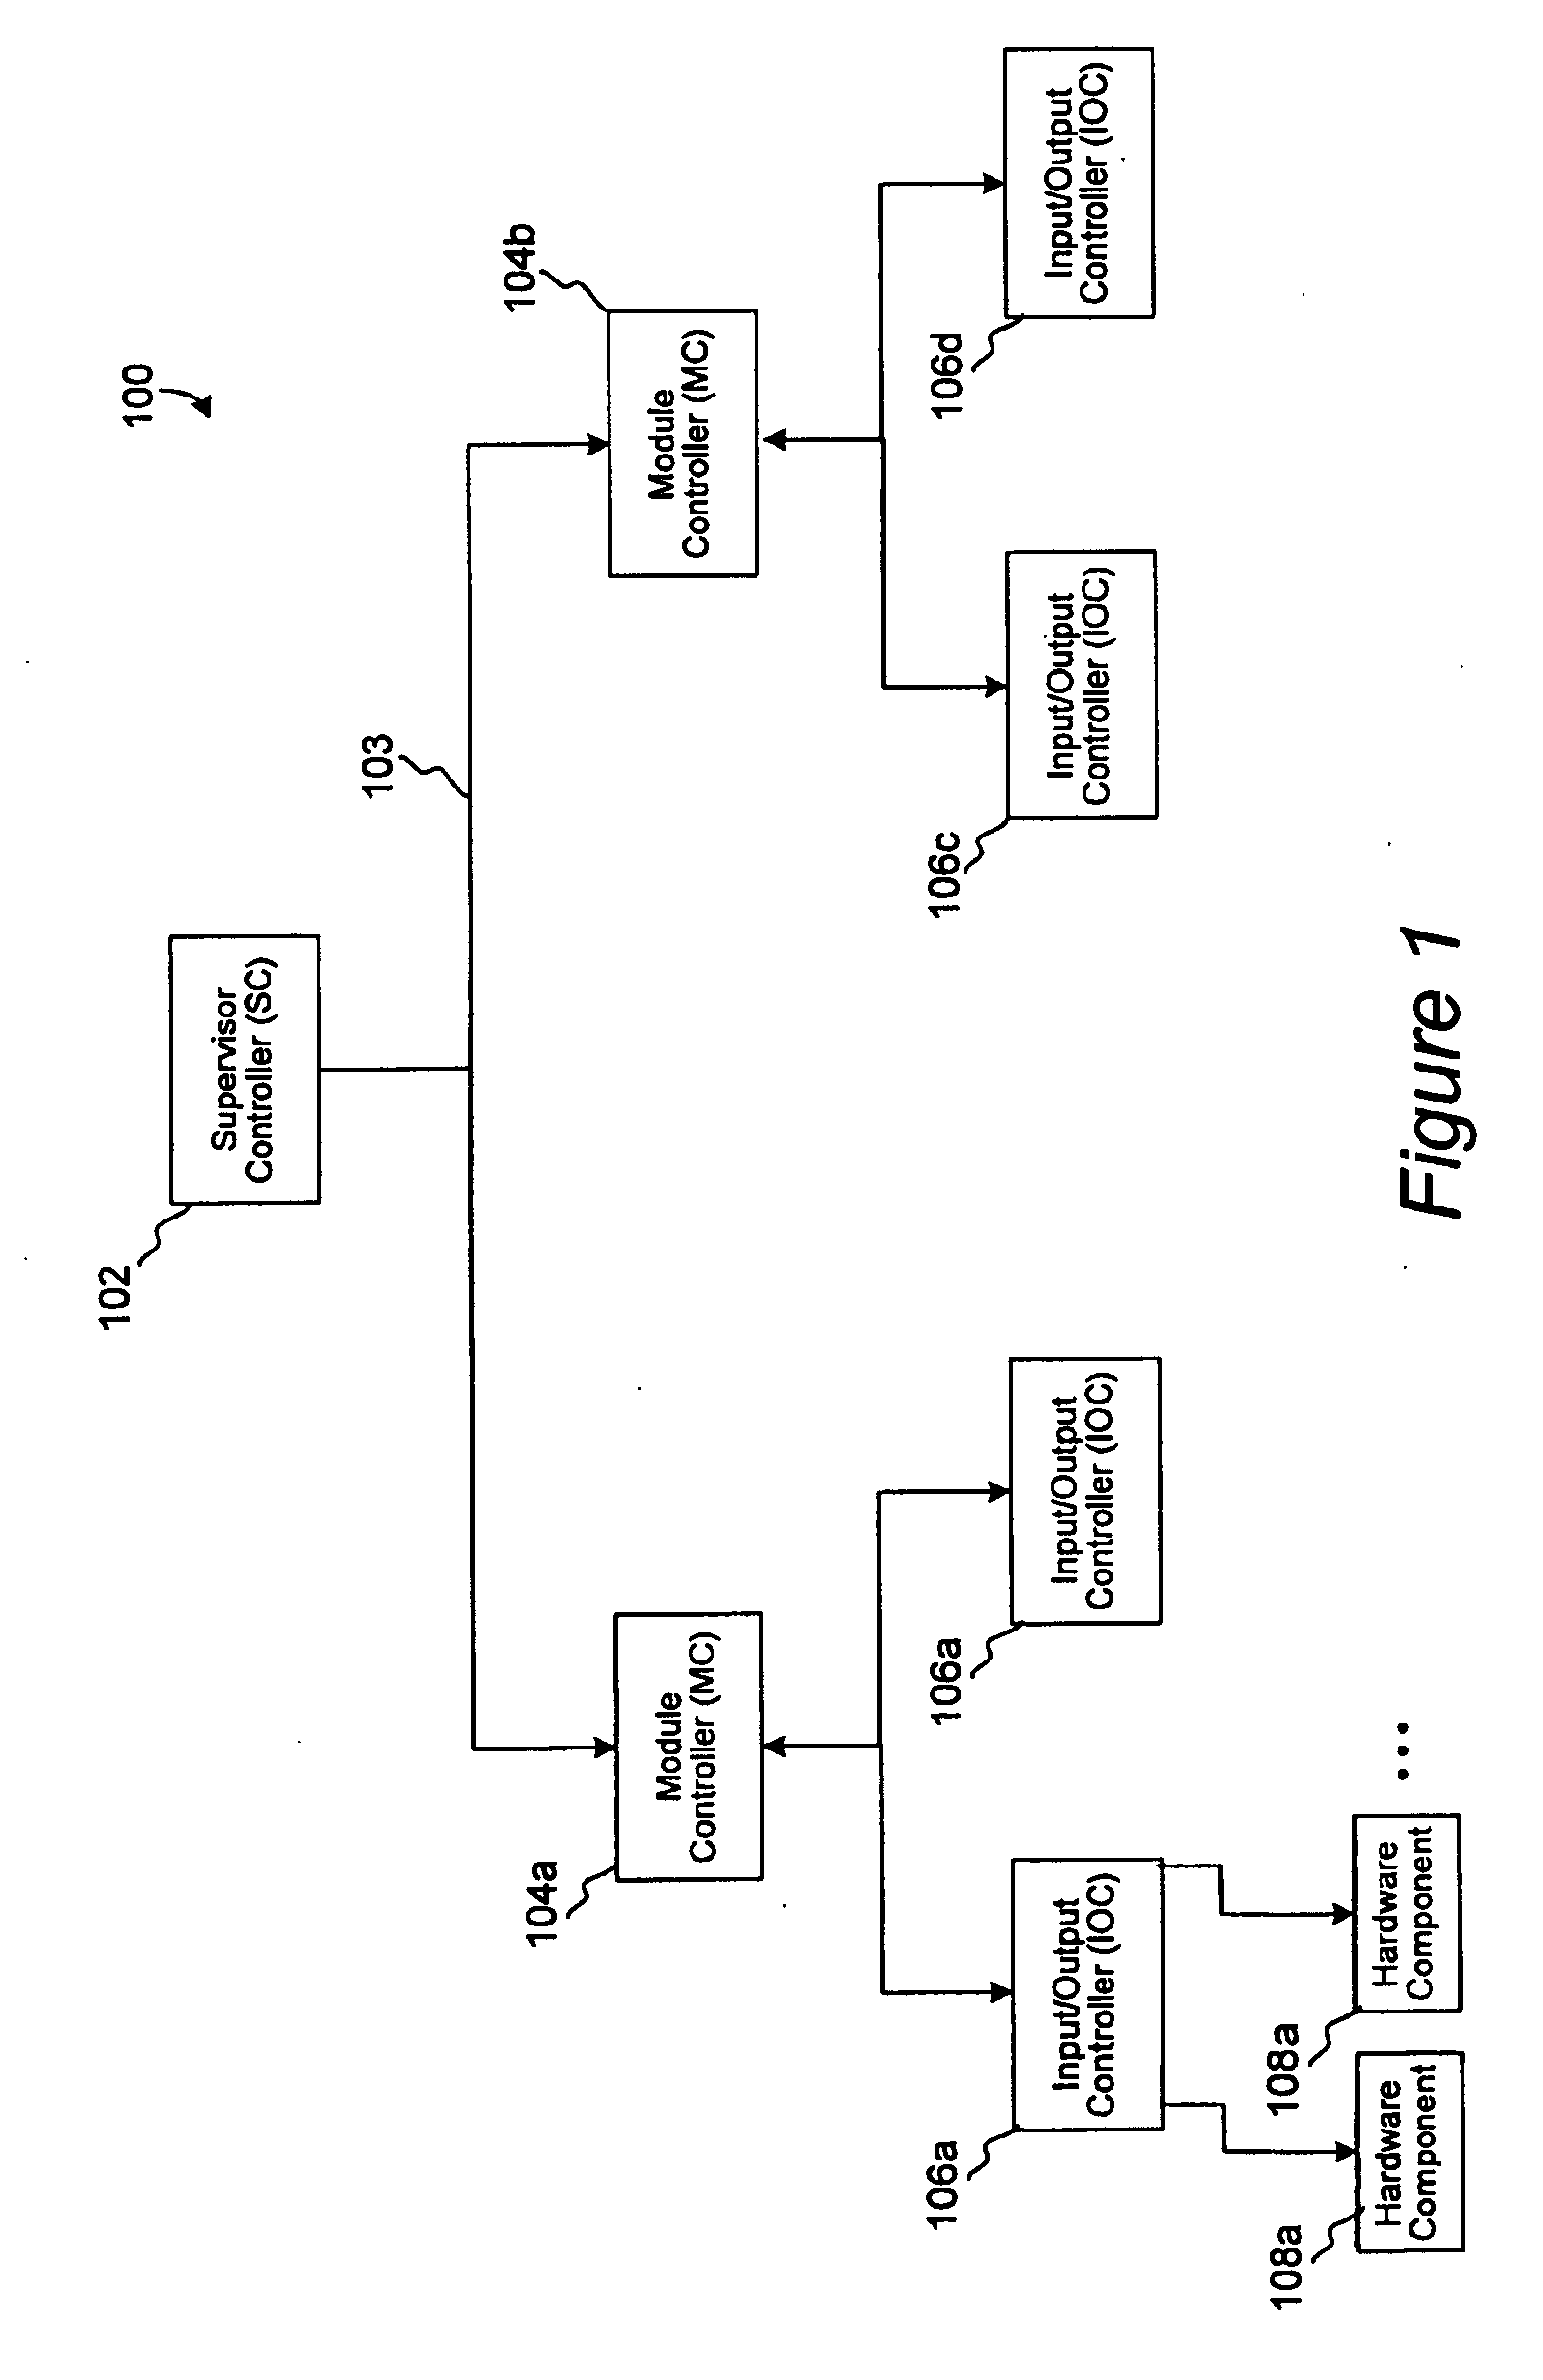 Apparatus and methods for precompiling program sequences for wafer processing